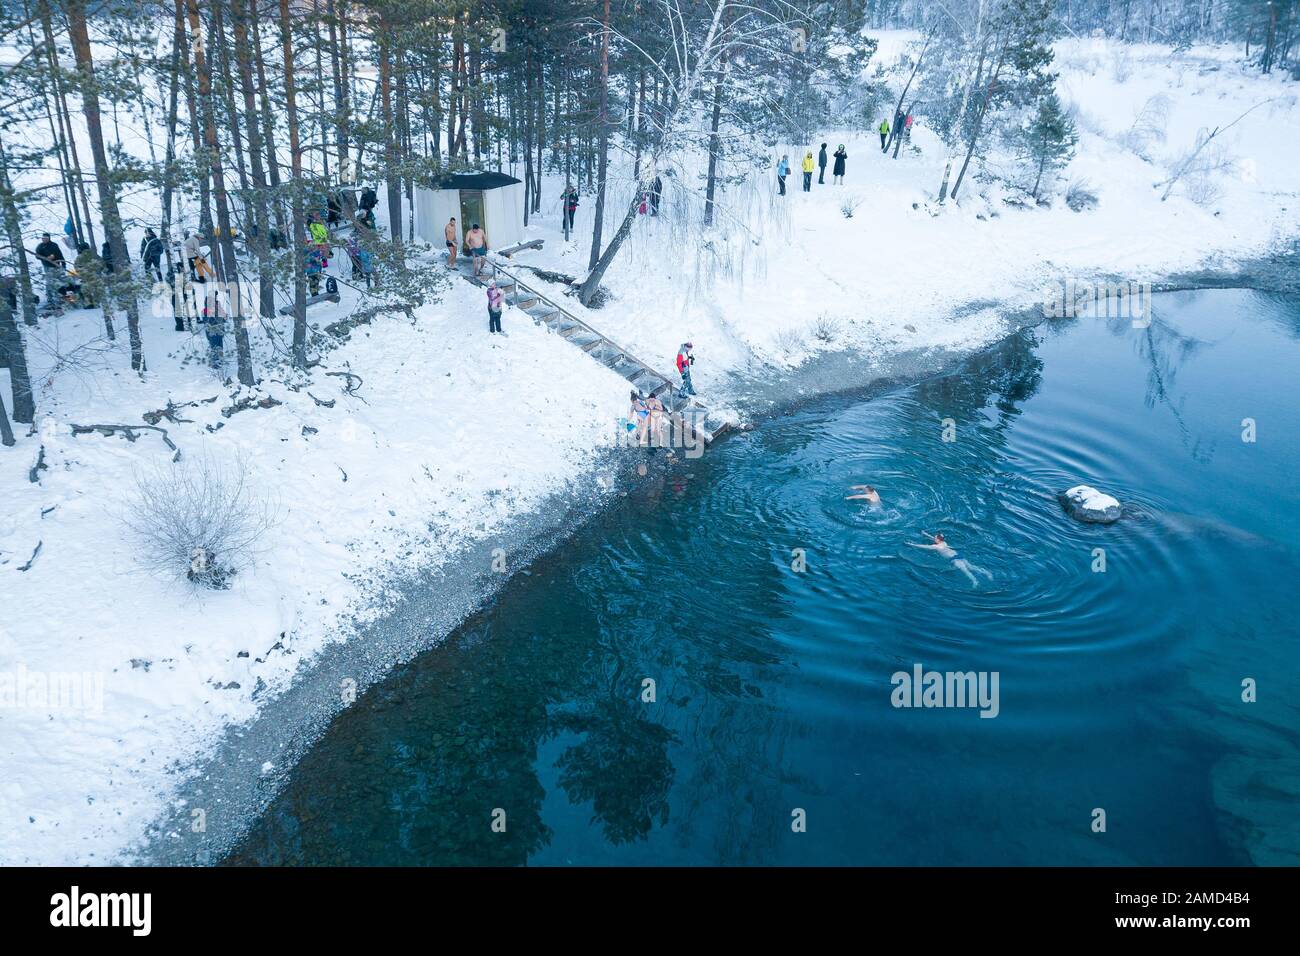 Altai, Russia - 03.01.2020: Aerial view of people bathing in an icy and cold blue lake with snow in the winter in the mountains during wellness and ba Stock Photo